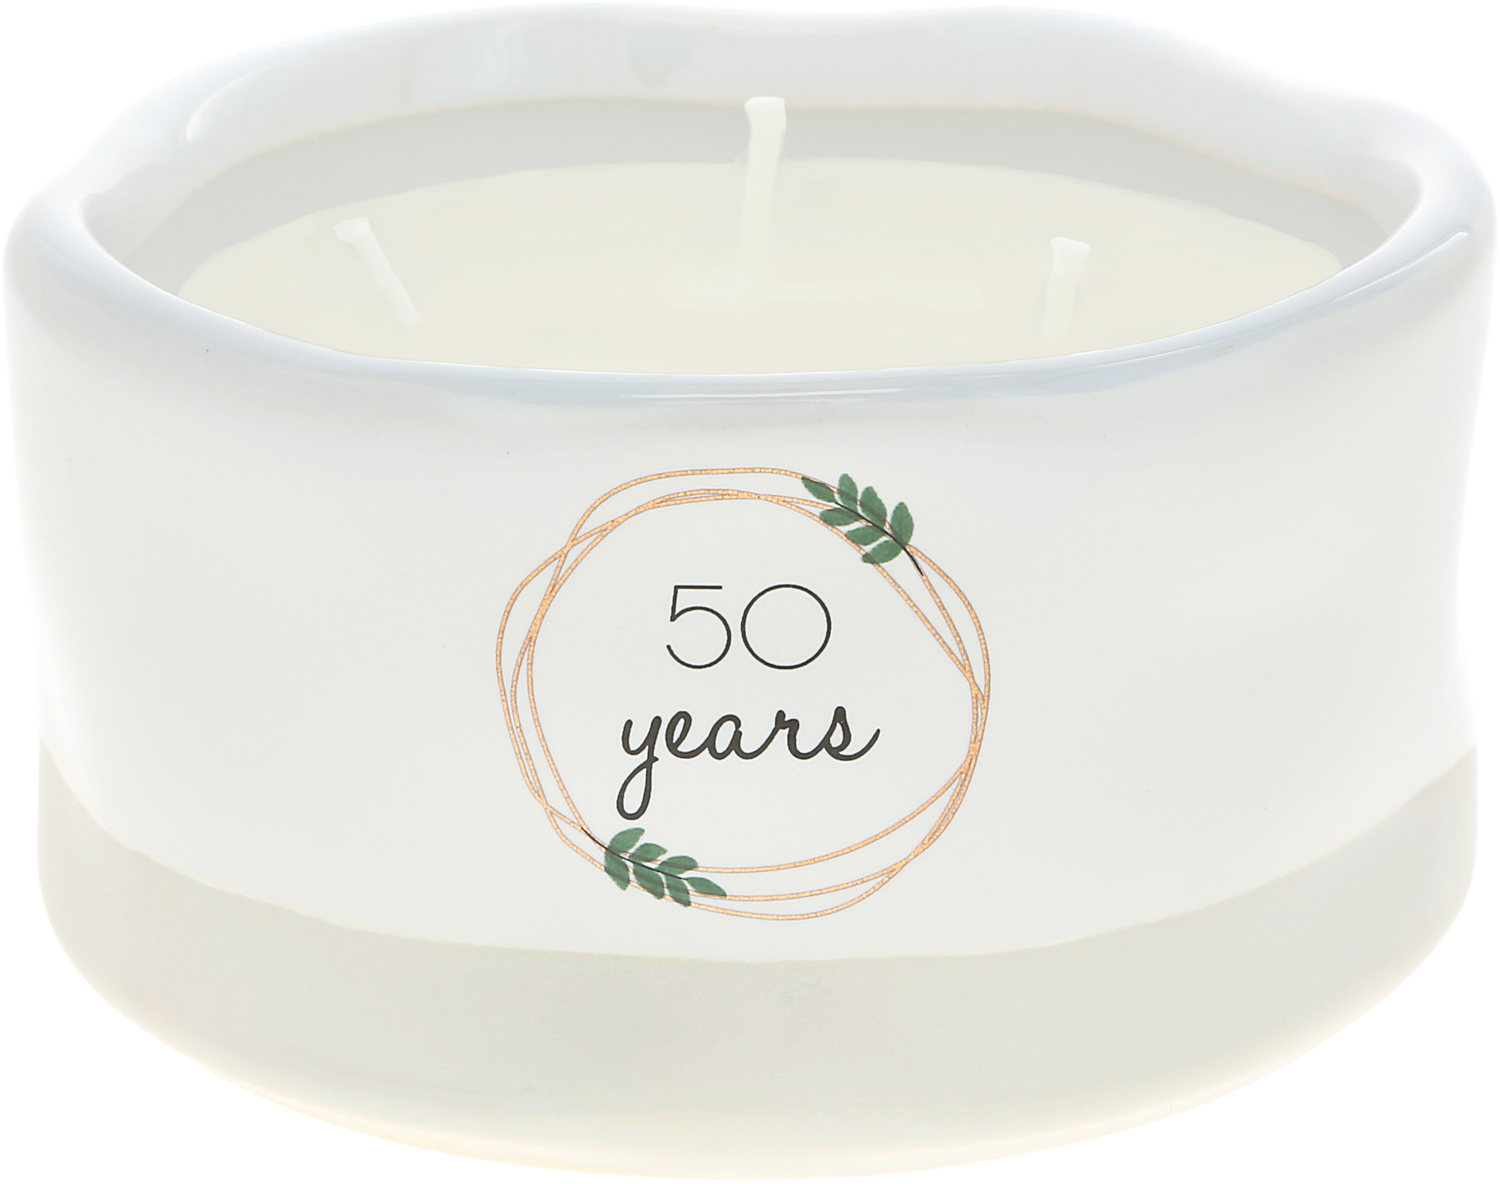 50 Years by Love Grows - 50 Years - 8 oz - 100% Soy Wax Reveal Candle
Scent: Tranquility